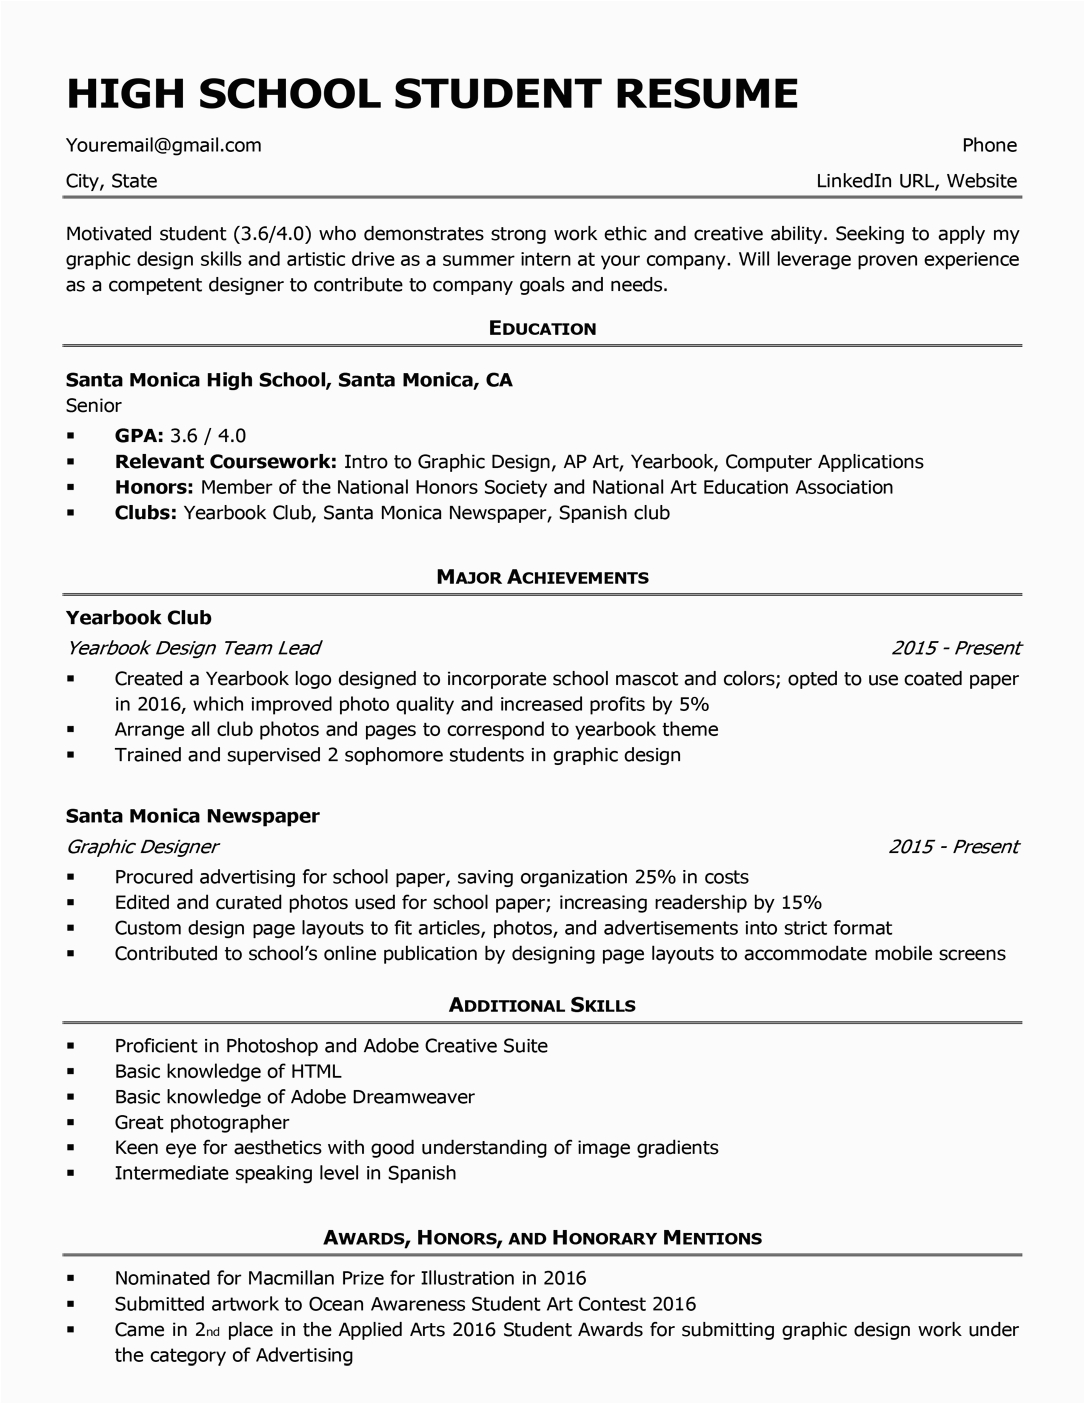 Resume Objective Samples for High School Students High School Resume Template & Writing Tips